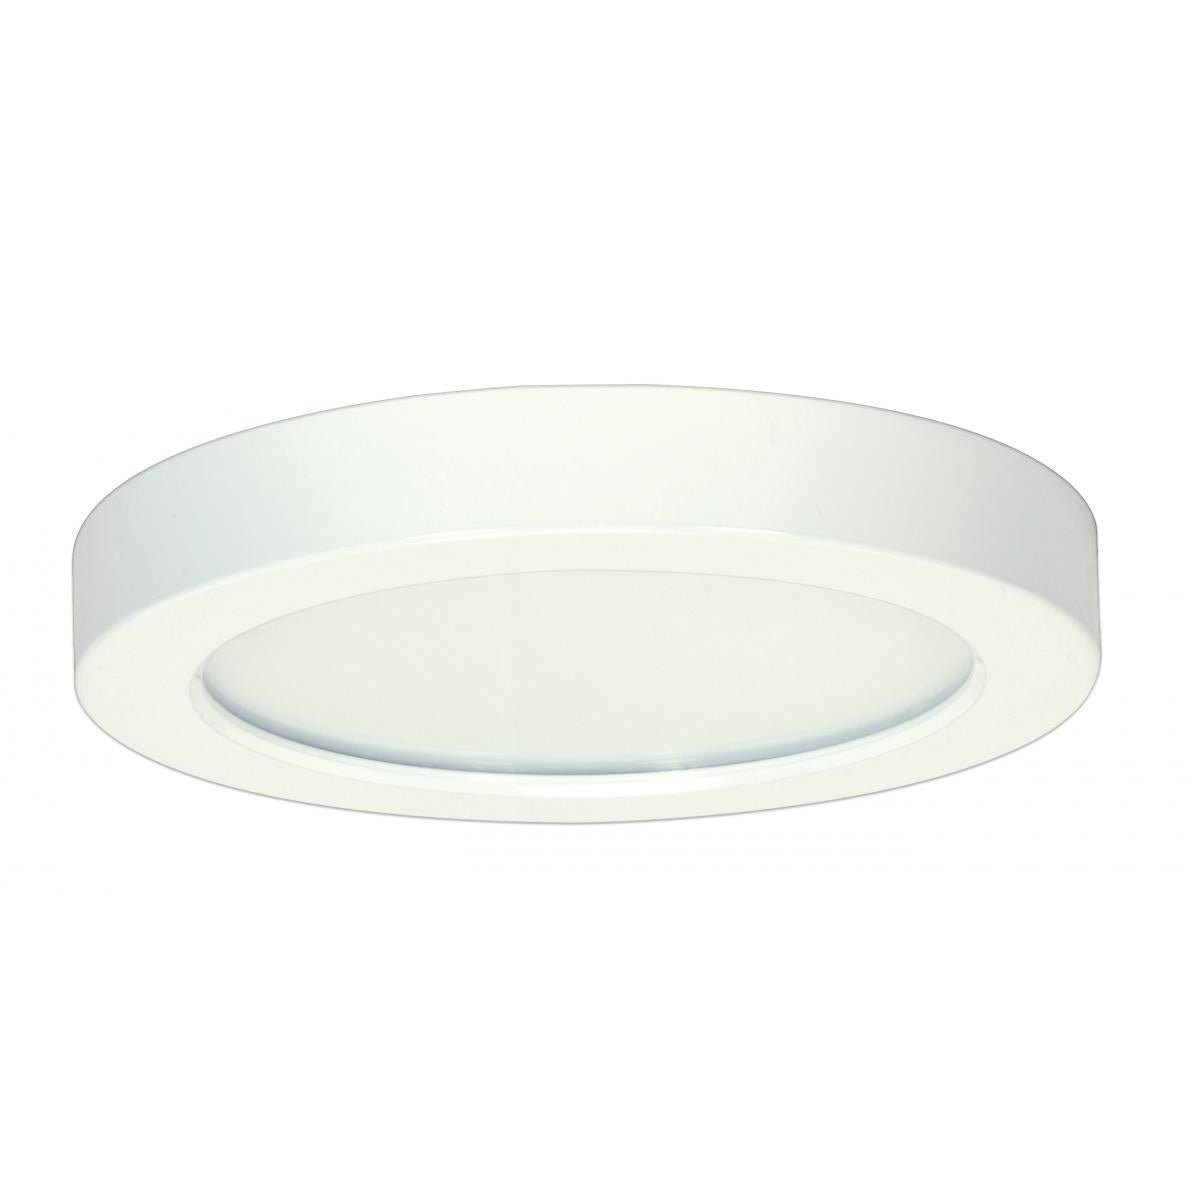 SATCO-S29360SATCO S29360 13.5W 7" Round LED Surface Mount 50K